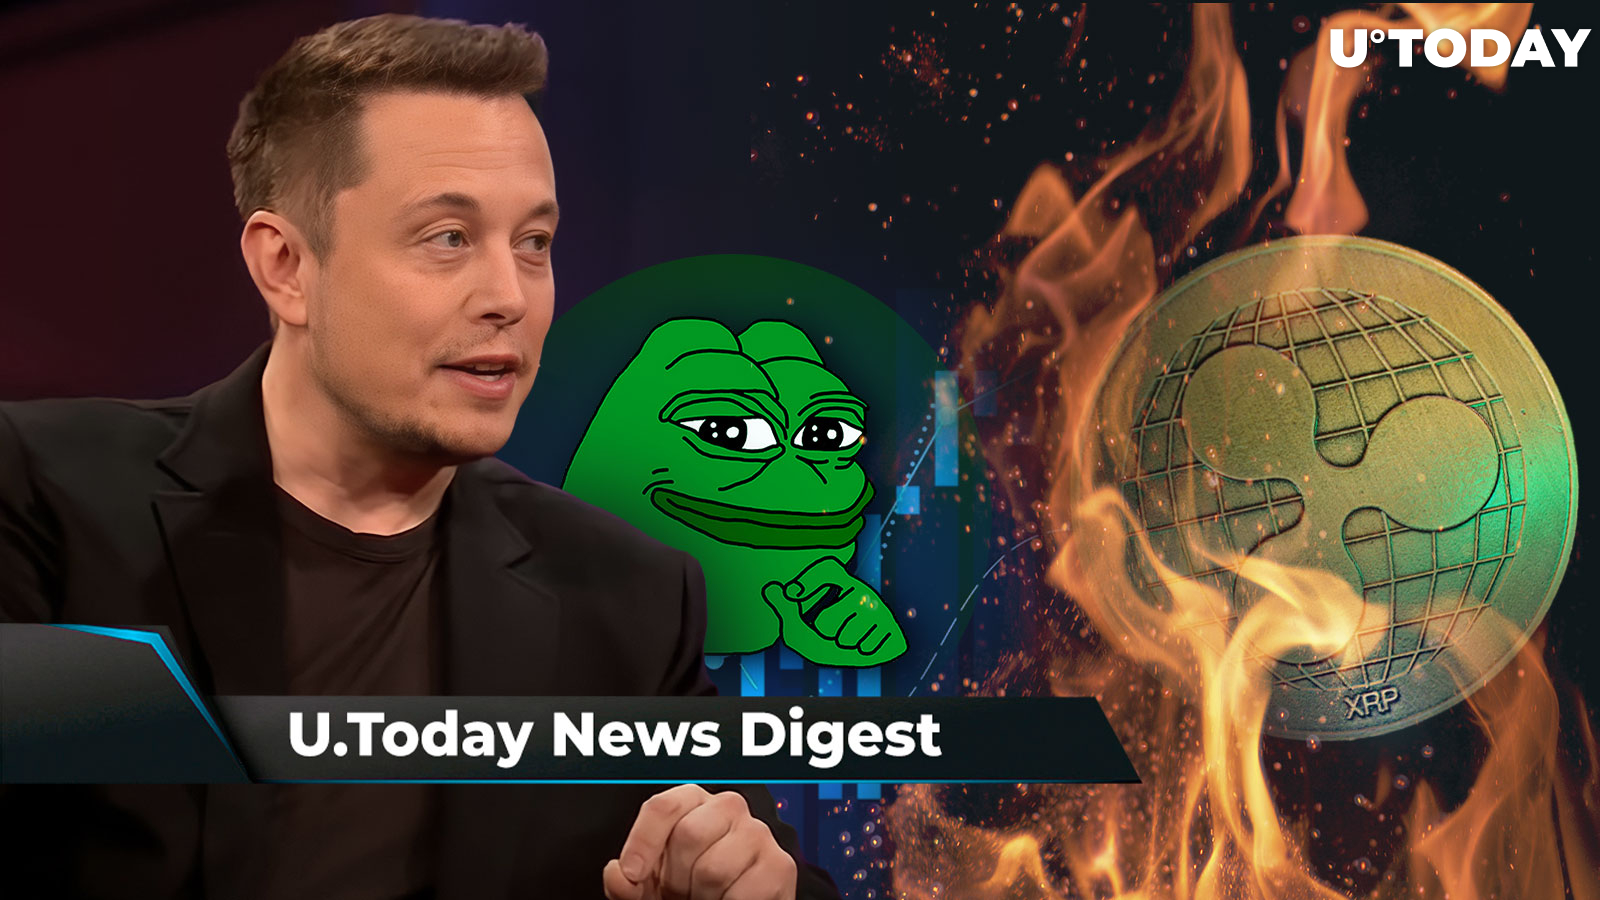 Ripple Ally v. SEC Takes New Turn, Elon Musk's Tweet Pushes PEPE up 54%, Ripple Could Burn Its XRP Right Now, Says Former Exec: Crypto News Digest by U.Today